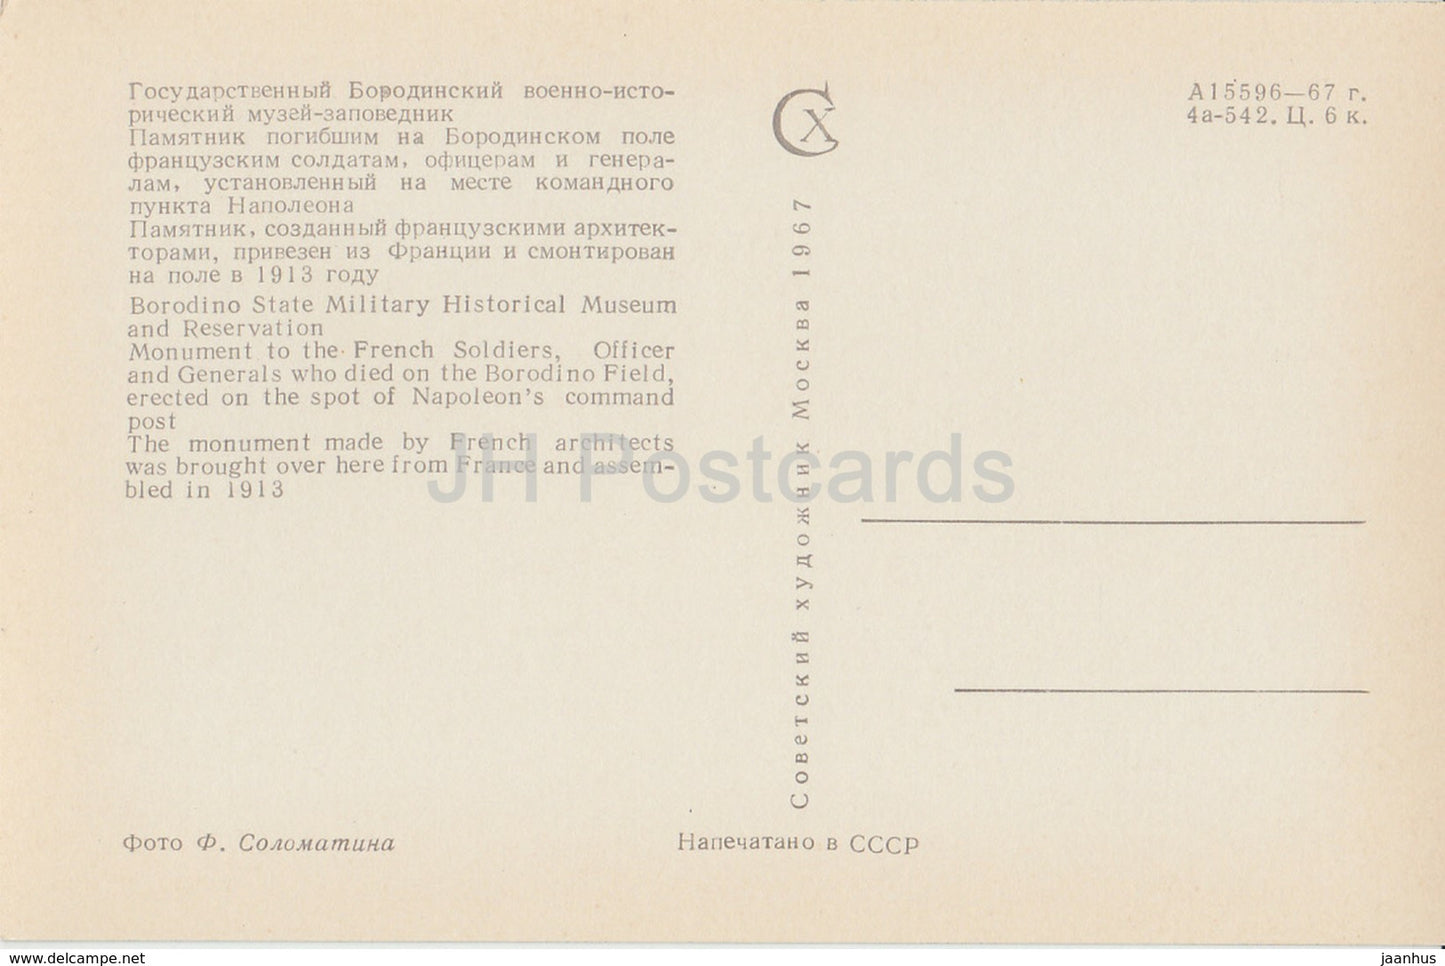 Monuments of Borodino Field - Monument to the French Soldiers - 1967 - Russia USSR - unused